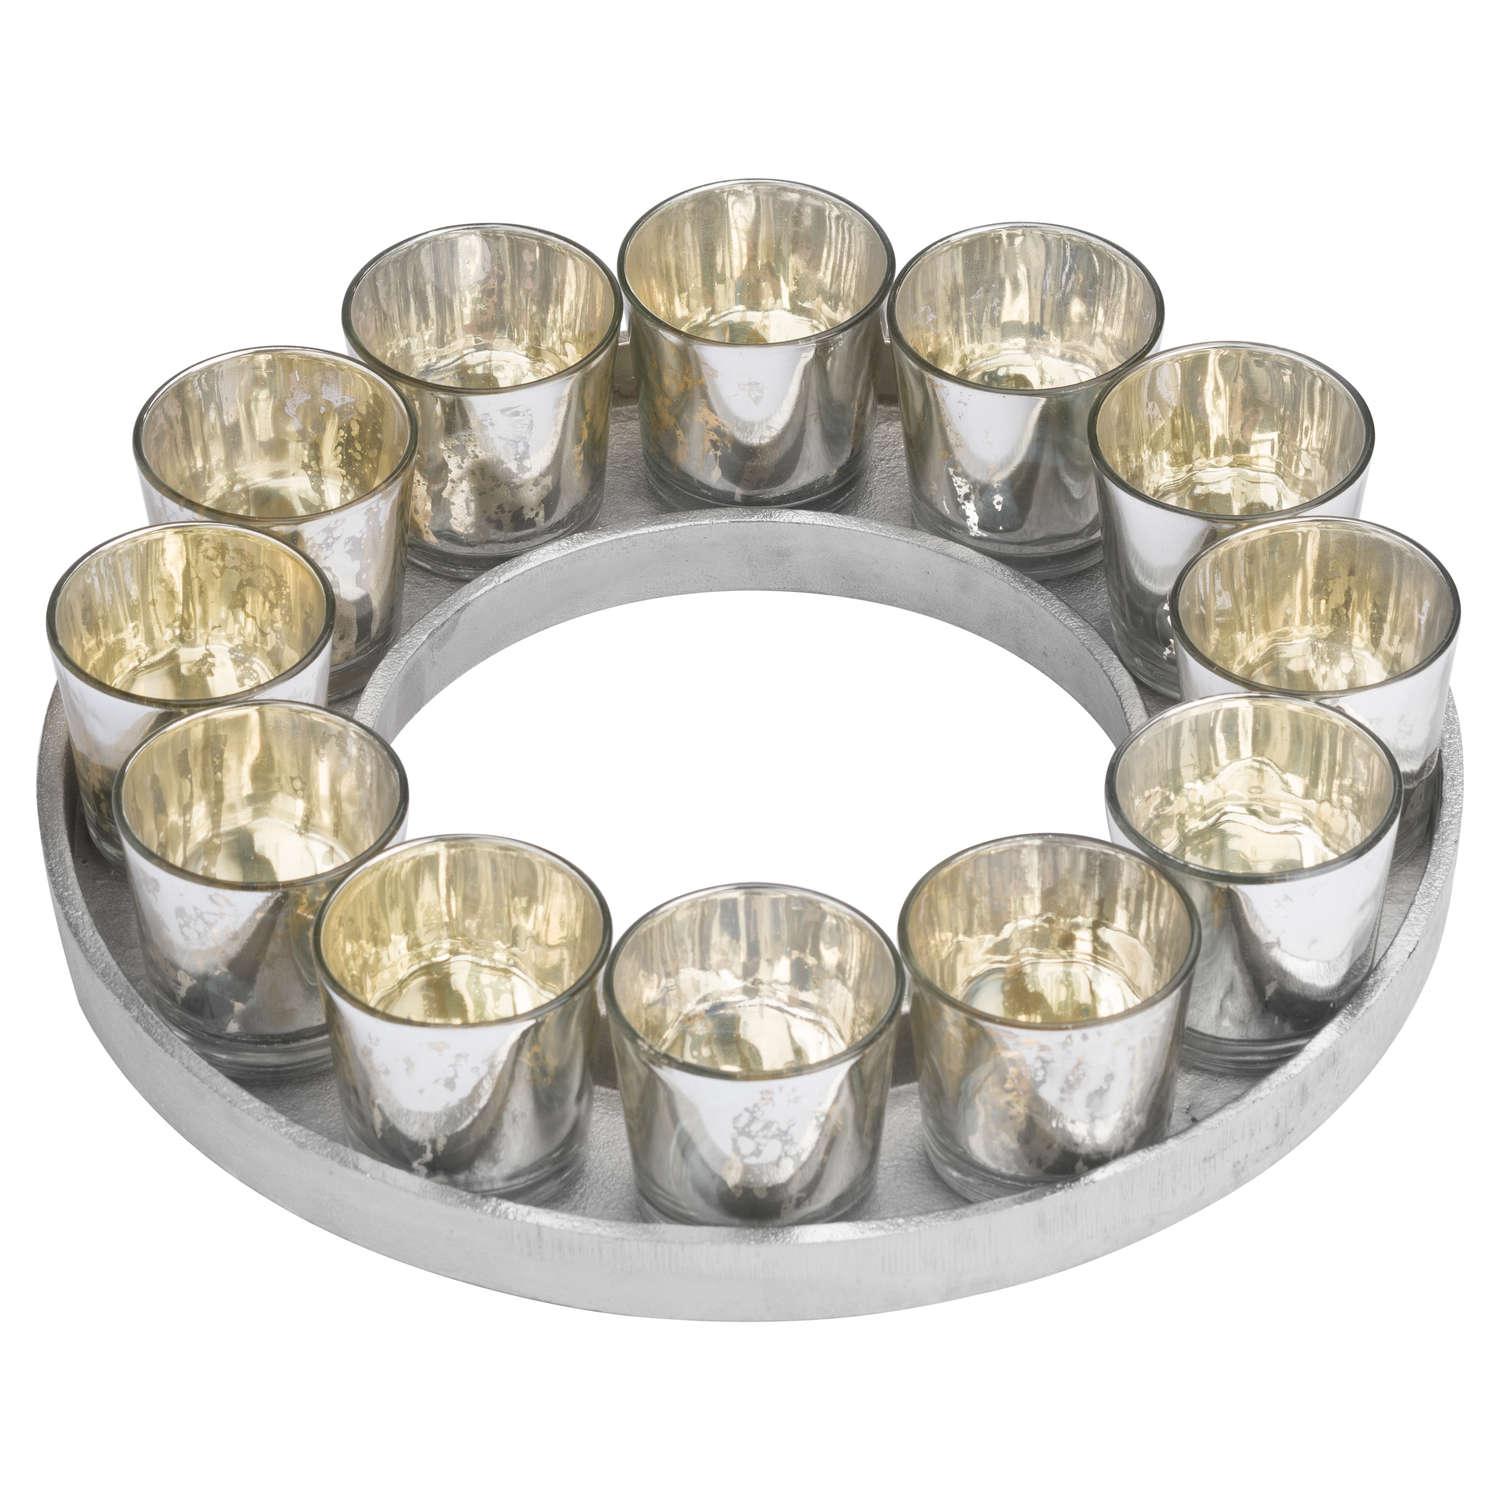 Circular Cast Aluminium Tray With Silver Glass Votives - Vookoo Lifestyle